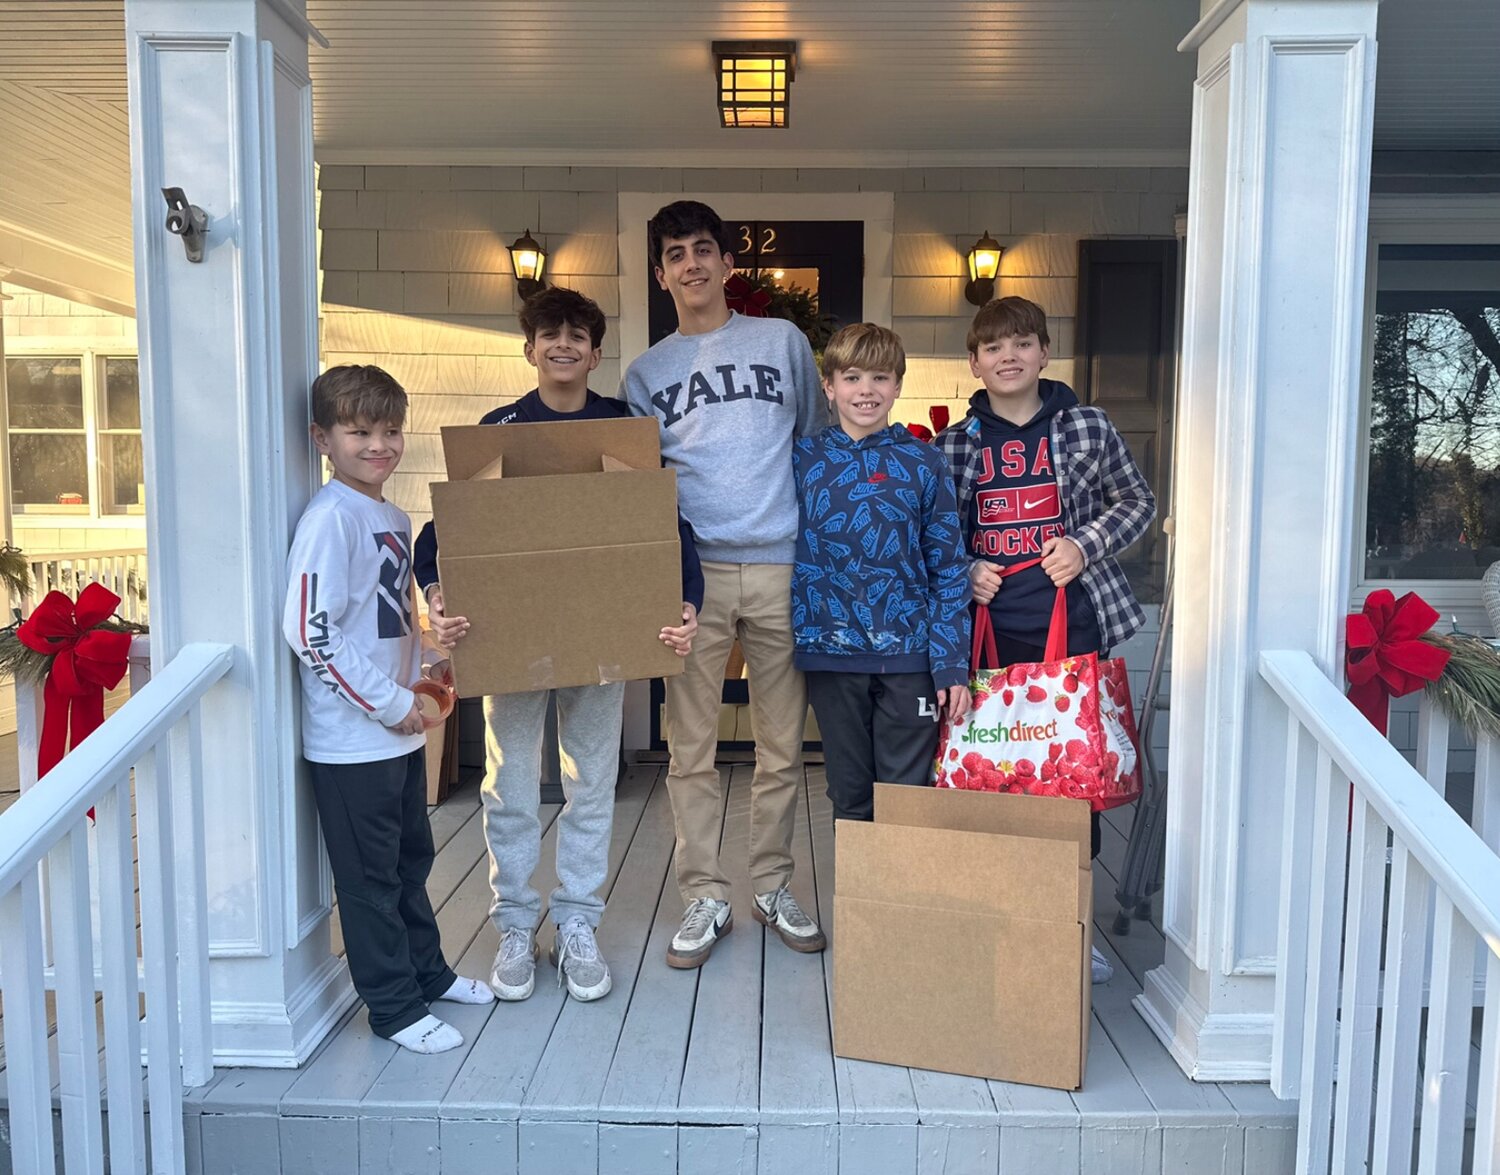 Lindsay Fox and Nitika Moran’s children are active in Friends of St. John’s. The week before Christmas, Brooks Fox, far left, Logan and Aidan Moran, and Tyler and James Fox delivered holiday meal boxes to a family.